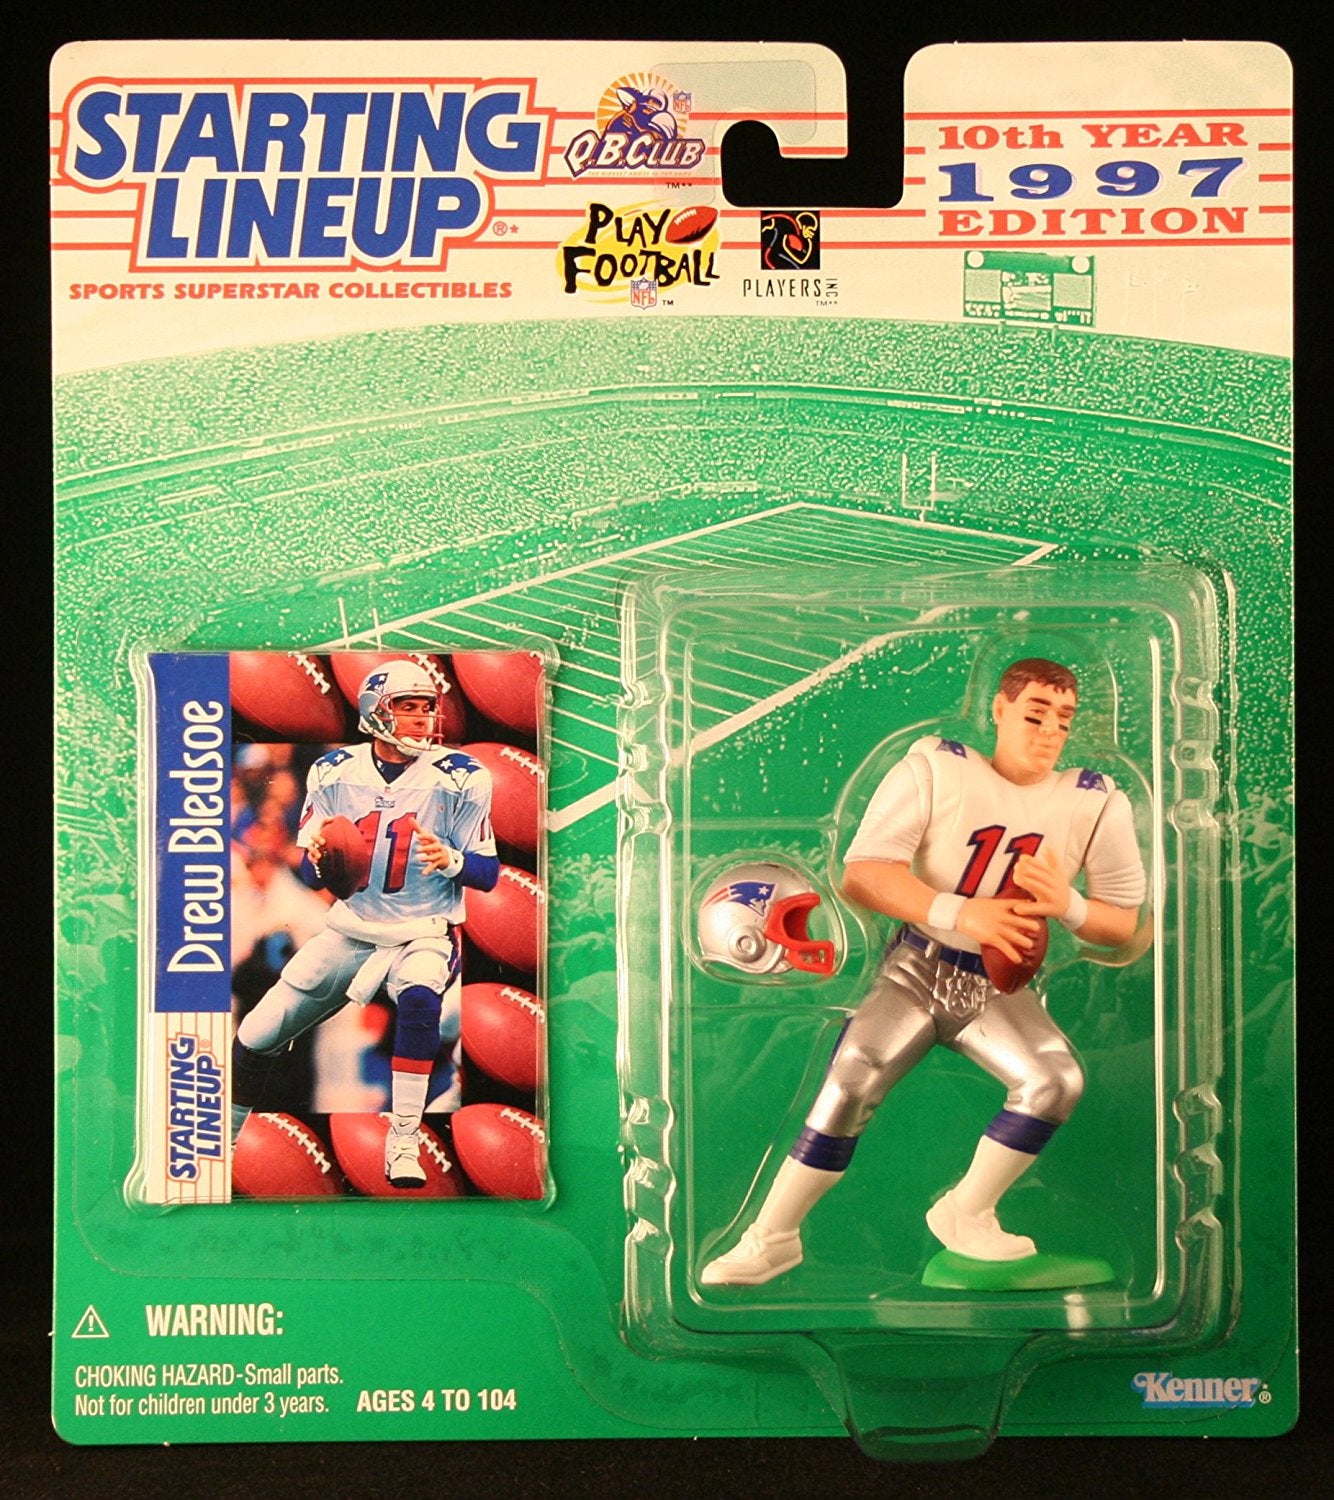 DREW BLEDSOE / NEW ENGLAND PATRIOTS 1997 NFL Starting Lineup Action Figure & Exclusive NFL Collector Trading Card